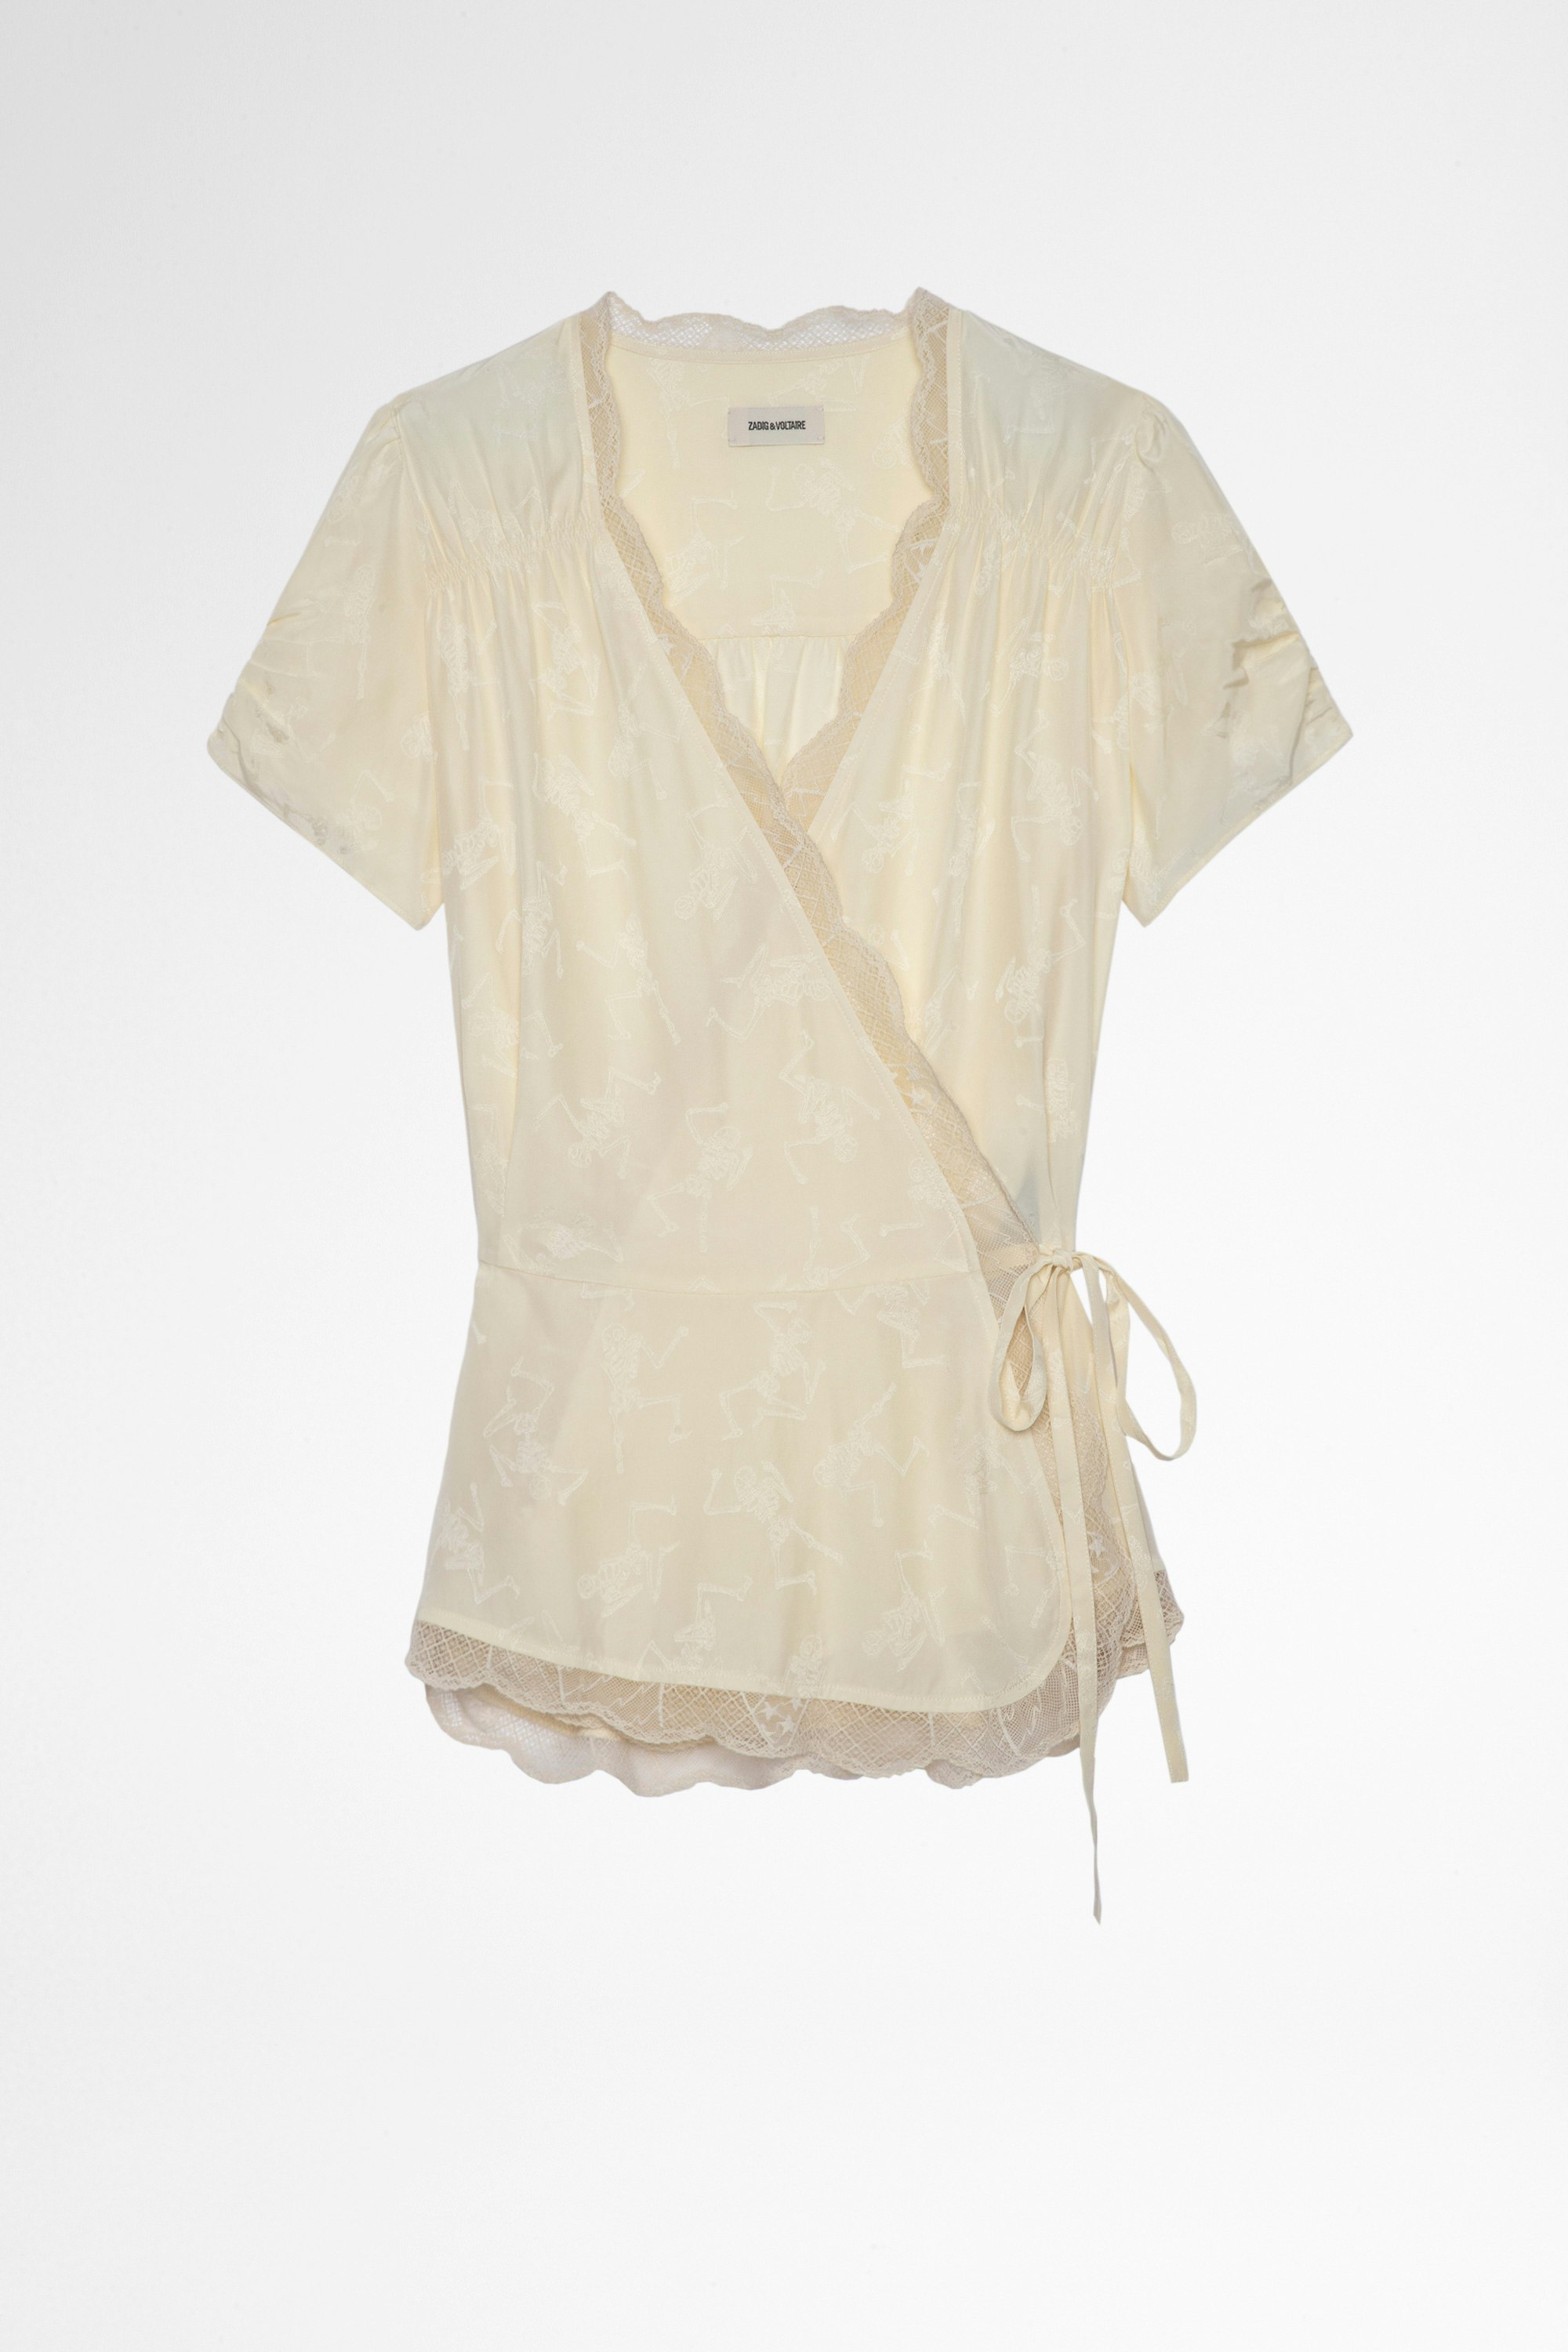 Silk Tyhpa Top Women's silk top in light yellow with lace trim